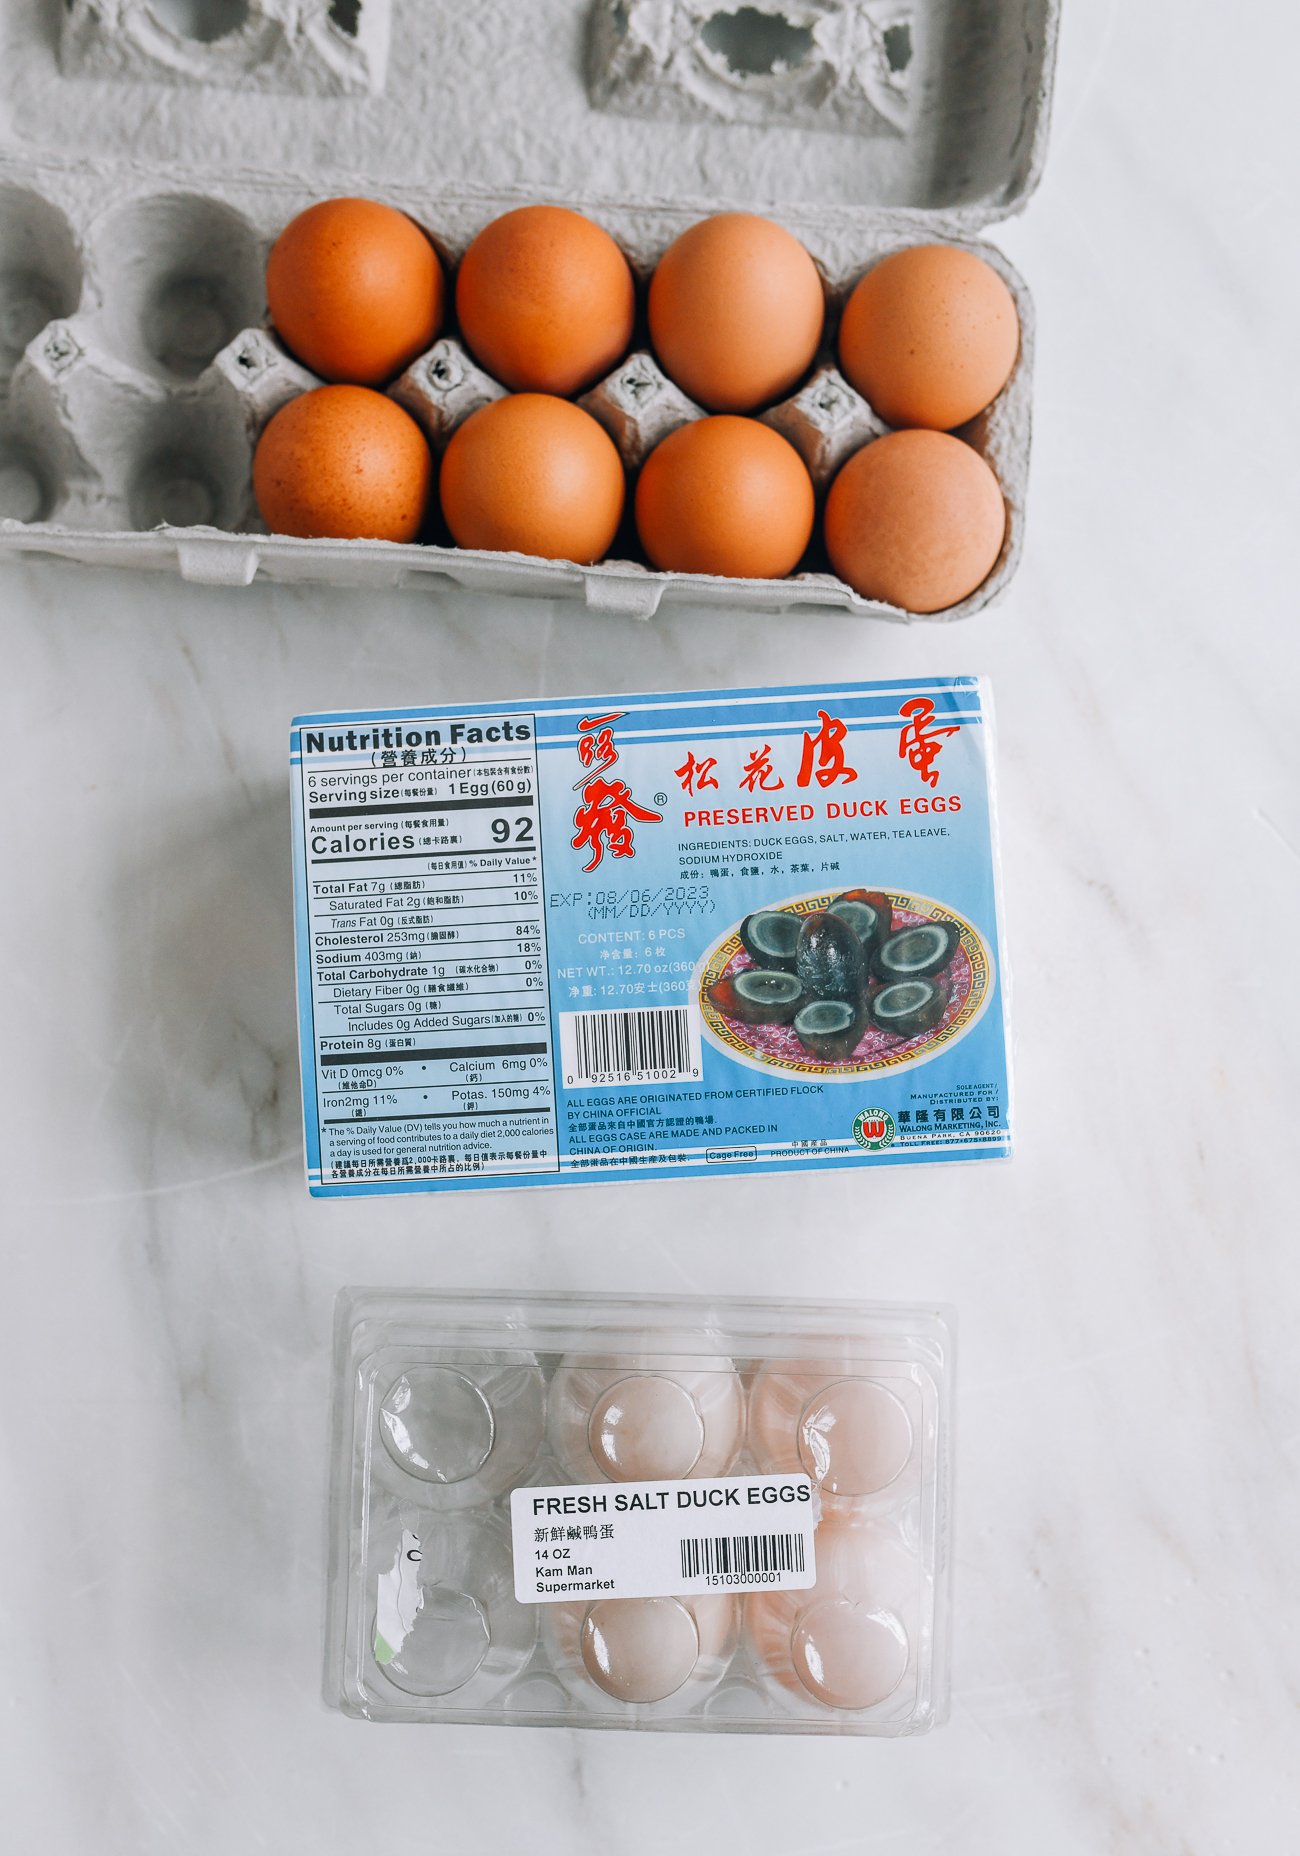 regular eggs, century eggs, and salted duck eggs in cartons